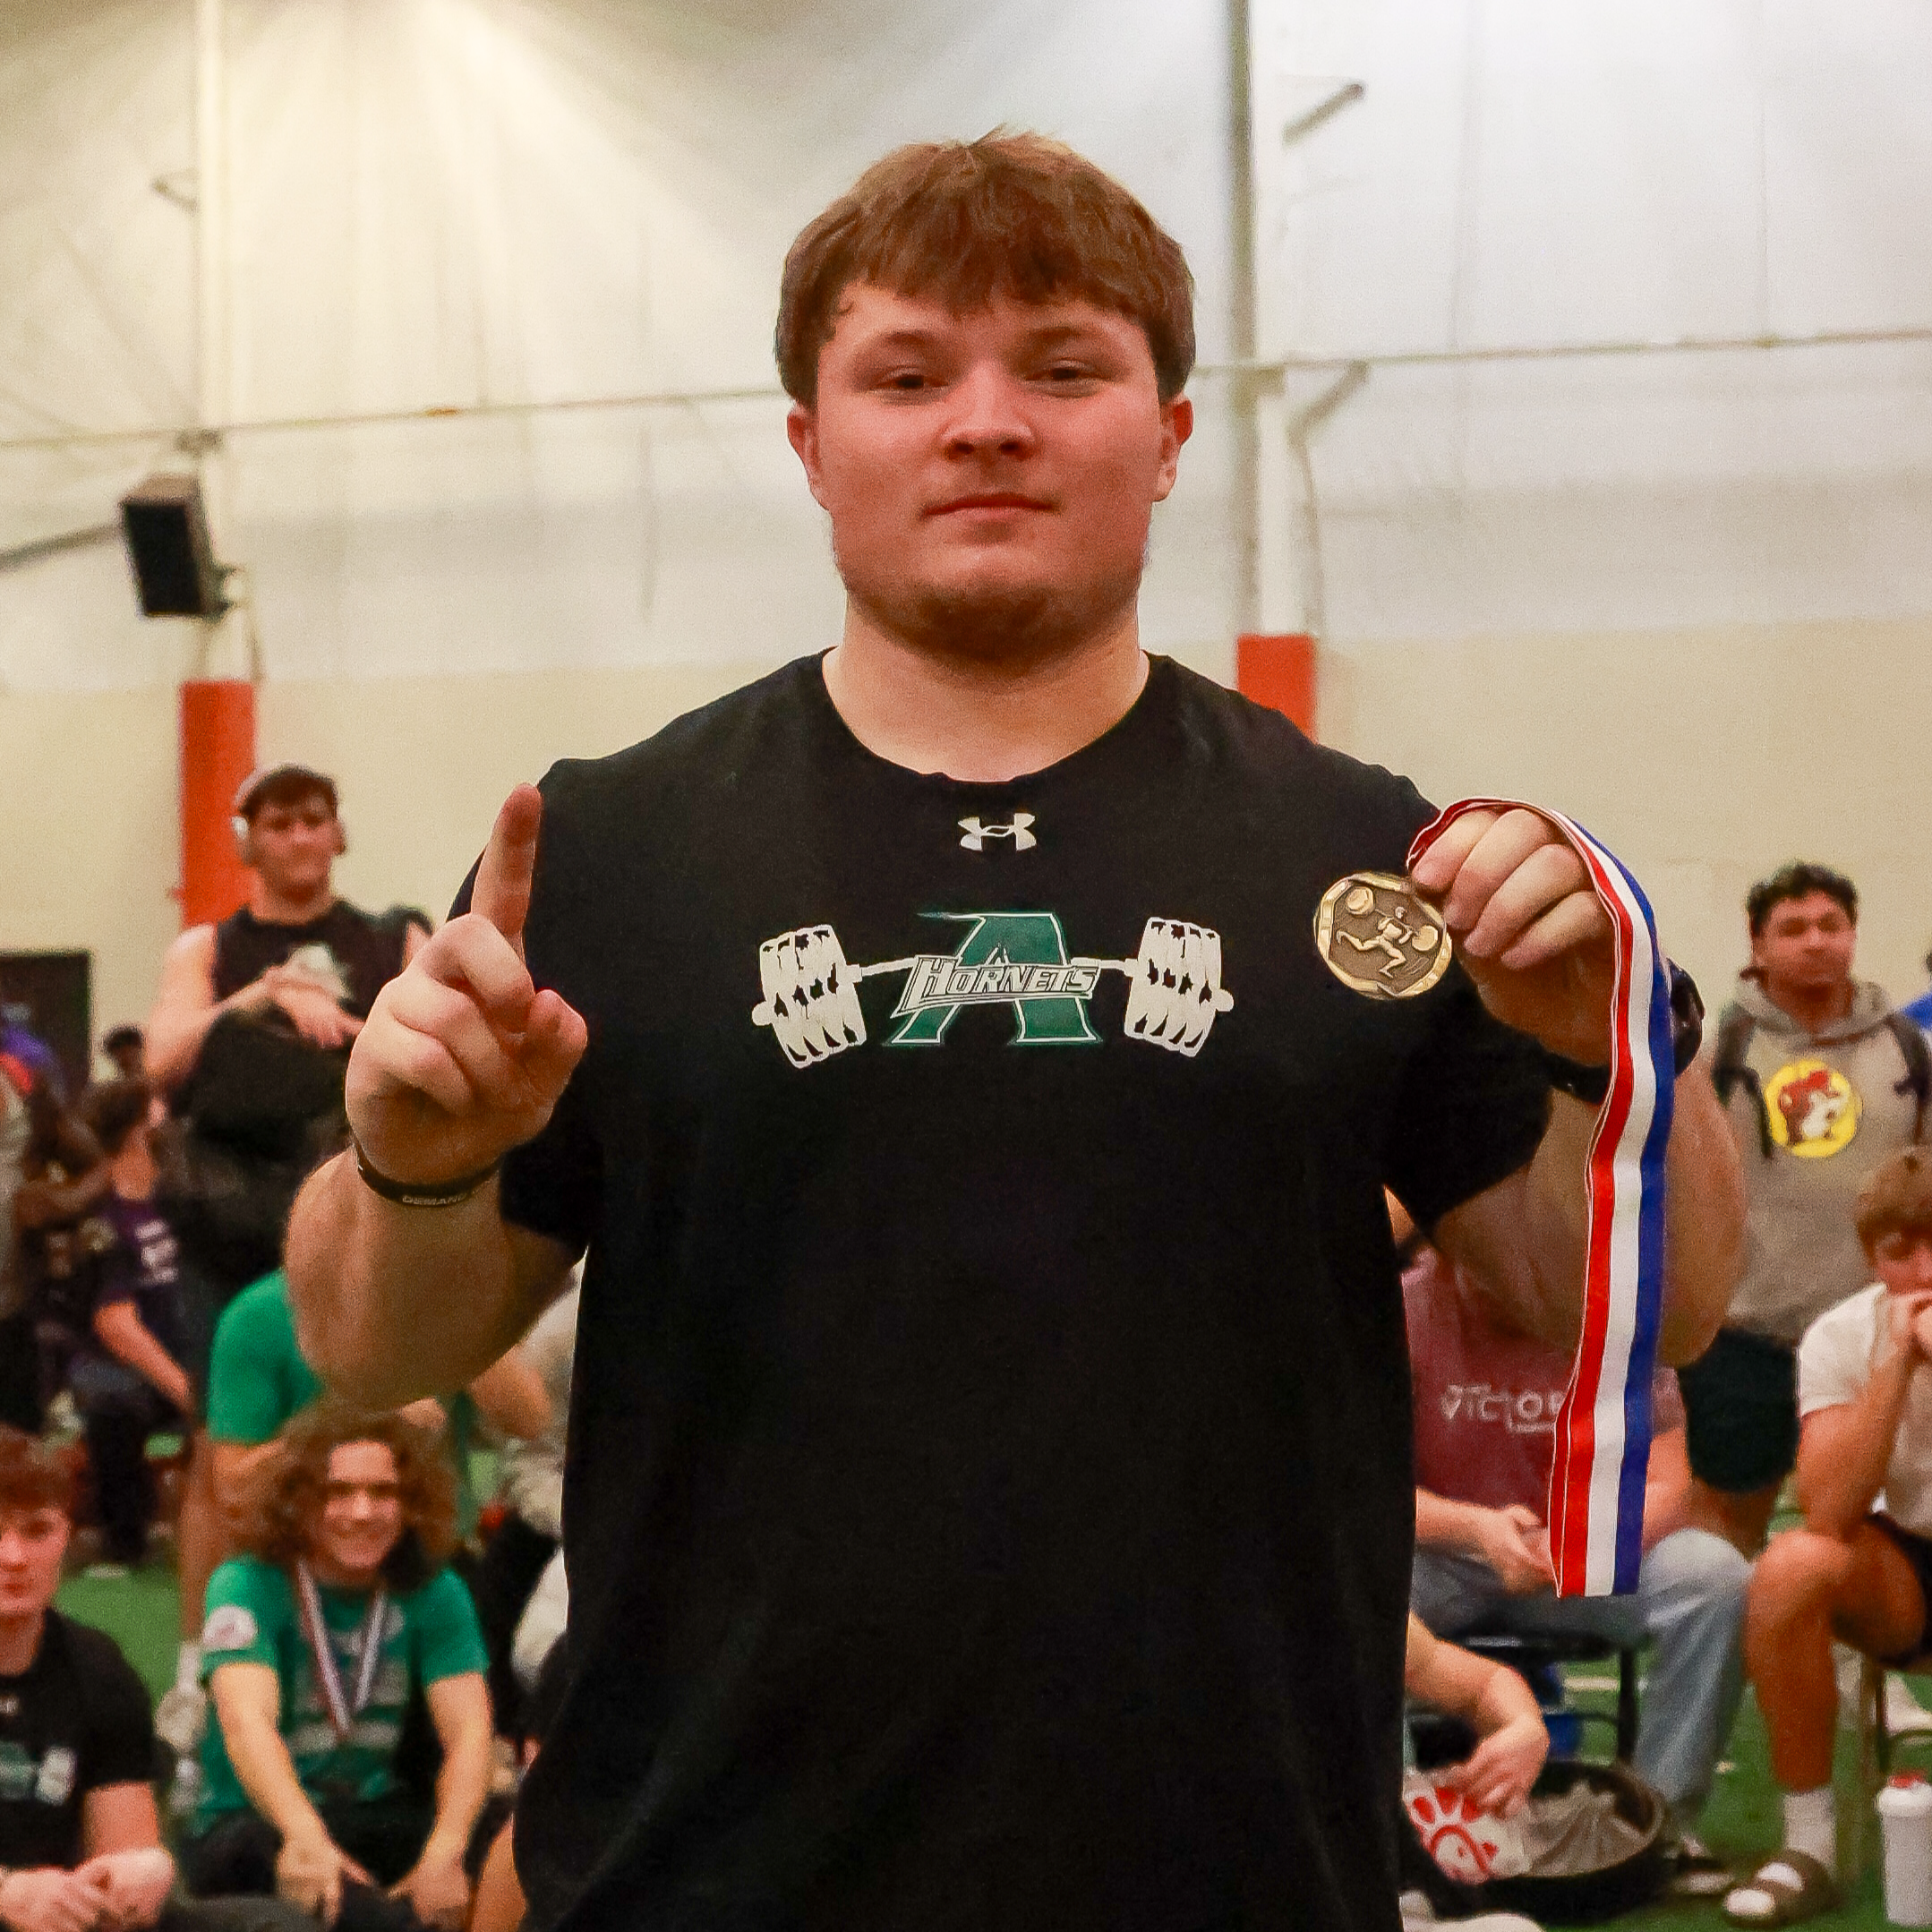 boy wearing black shirt, holding 1st place medal and one finger up